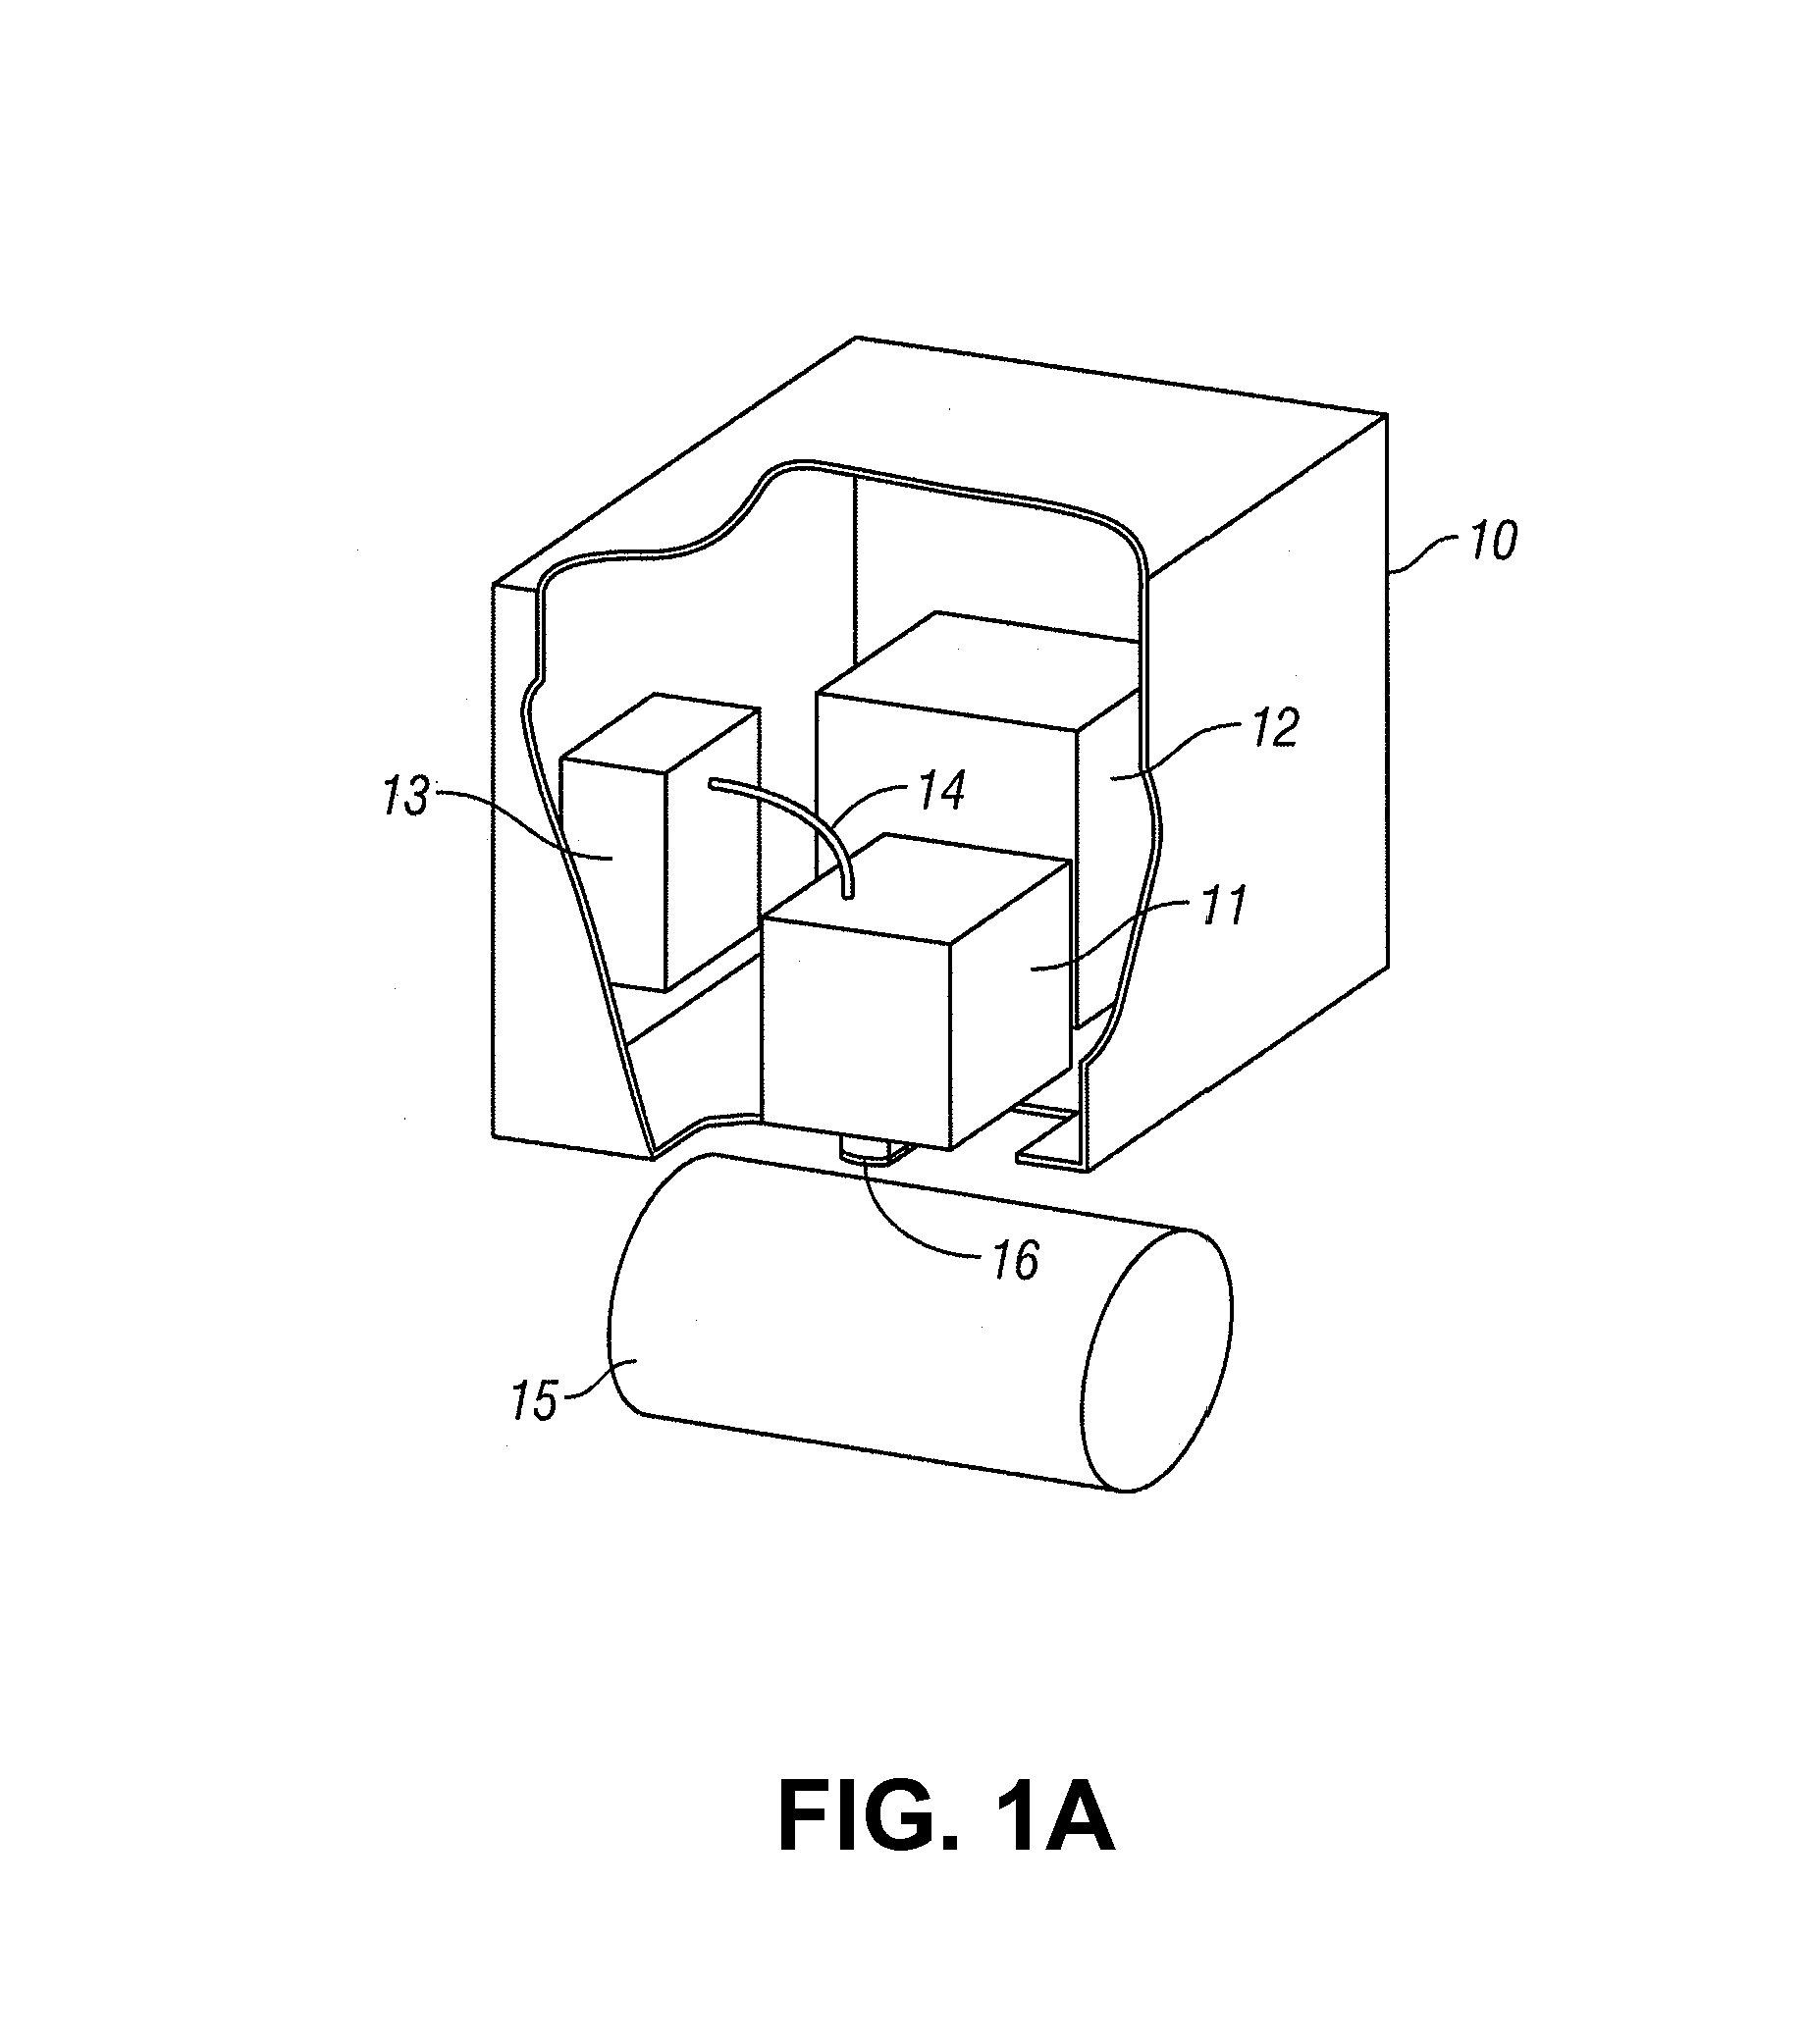 Method and apparatus for coupling a sample probe with a sample site